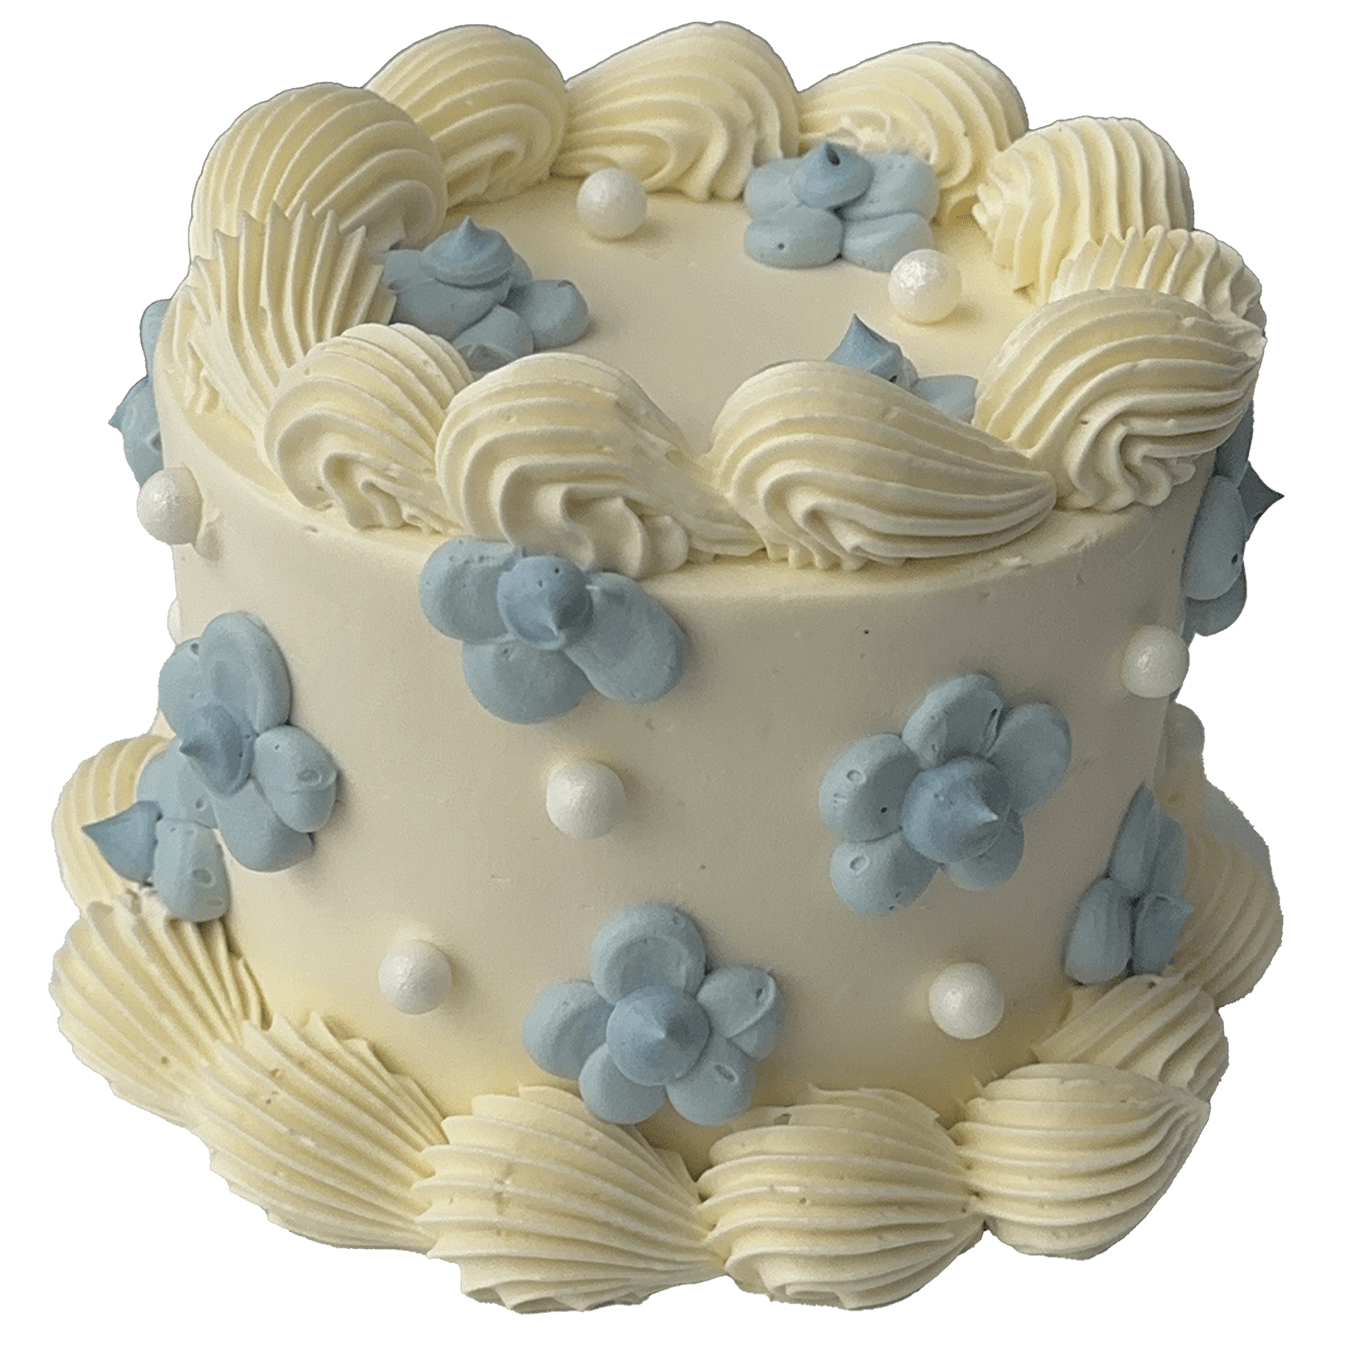  A small mini round shaped Swiss meringue buttercream cake with a white base colour and white piped shells.  Pretty blue daisies have been piped on the top and sides of the cake and some sugar pearls added to complete the decoration.